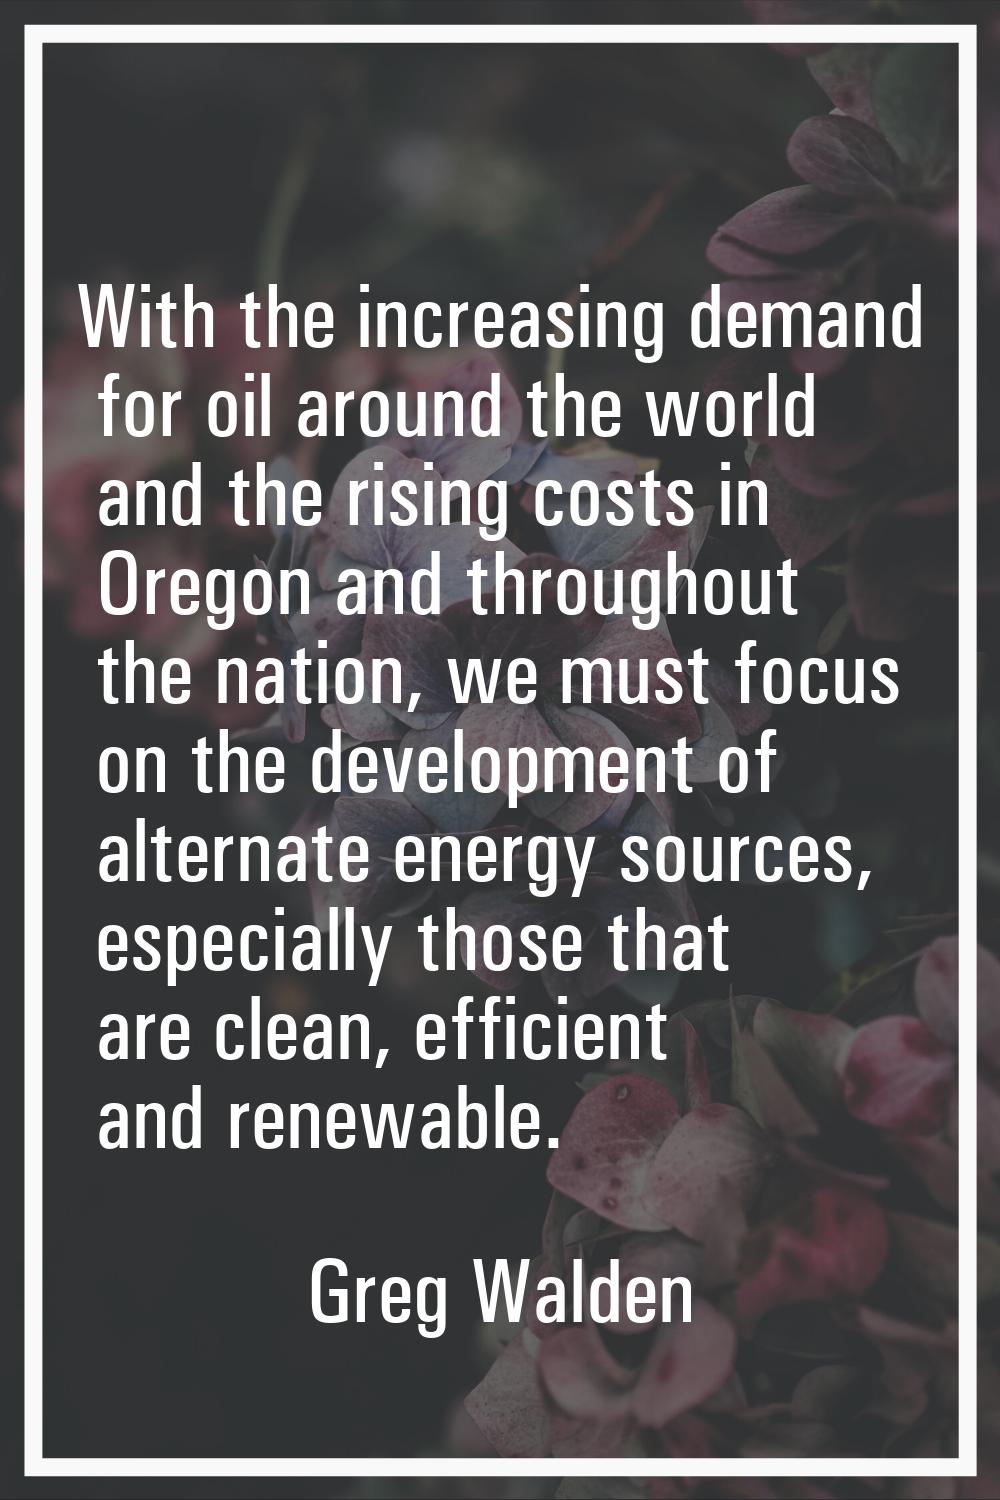 With the increasing demand for oil around the world and the rising costs in Oregon and throughout t